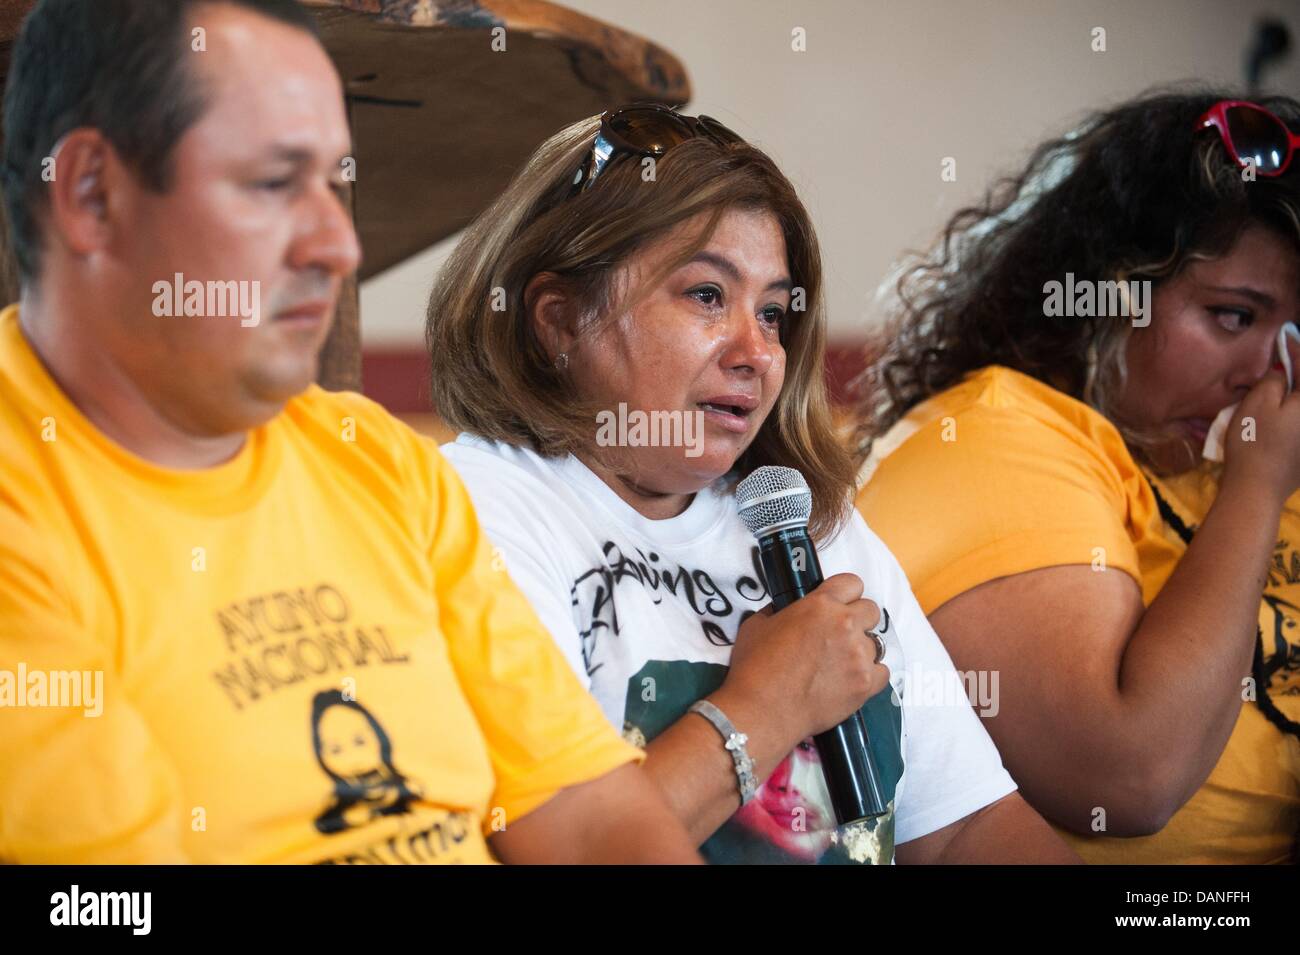 July 16, 2013 - Tucson, Arizona, United States - GUADALUPE GUERRERO, the mother of a  C. Lamadrid, a 19-year-old U.S. citizen shot in the back three times by U.S. Border Patrol agents in 2011, cries while talking about violence on the border.  Eight Tucsonans will spend the next five days fasting as a protest against alleged police collaboration with U.S. Border Patrol, migrant deaths in the desert and the militarization of the border.  The group gathered at a Tucson, Ariz. church to make the announcement. (Credit Image: © Will Seberger/ZUMAPRESS.com) Stock Photo